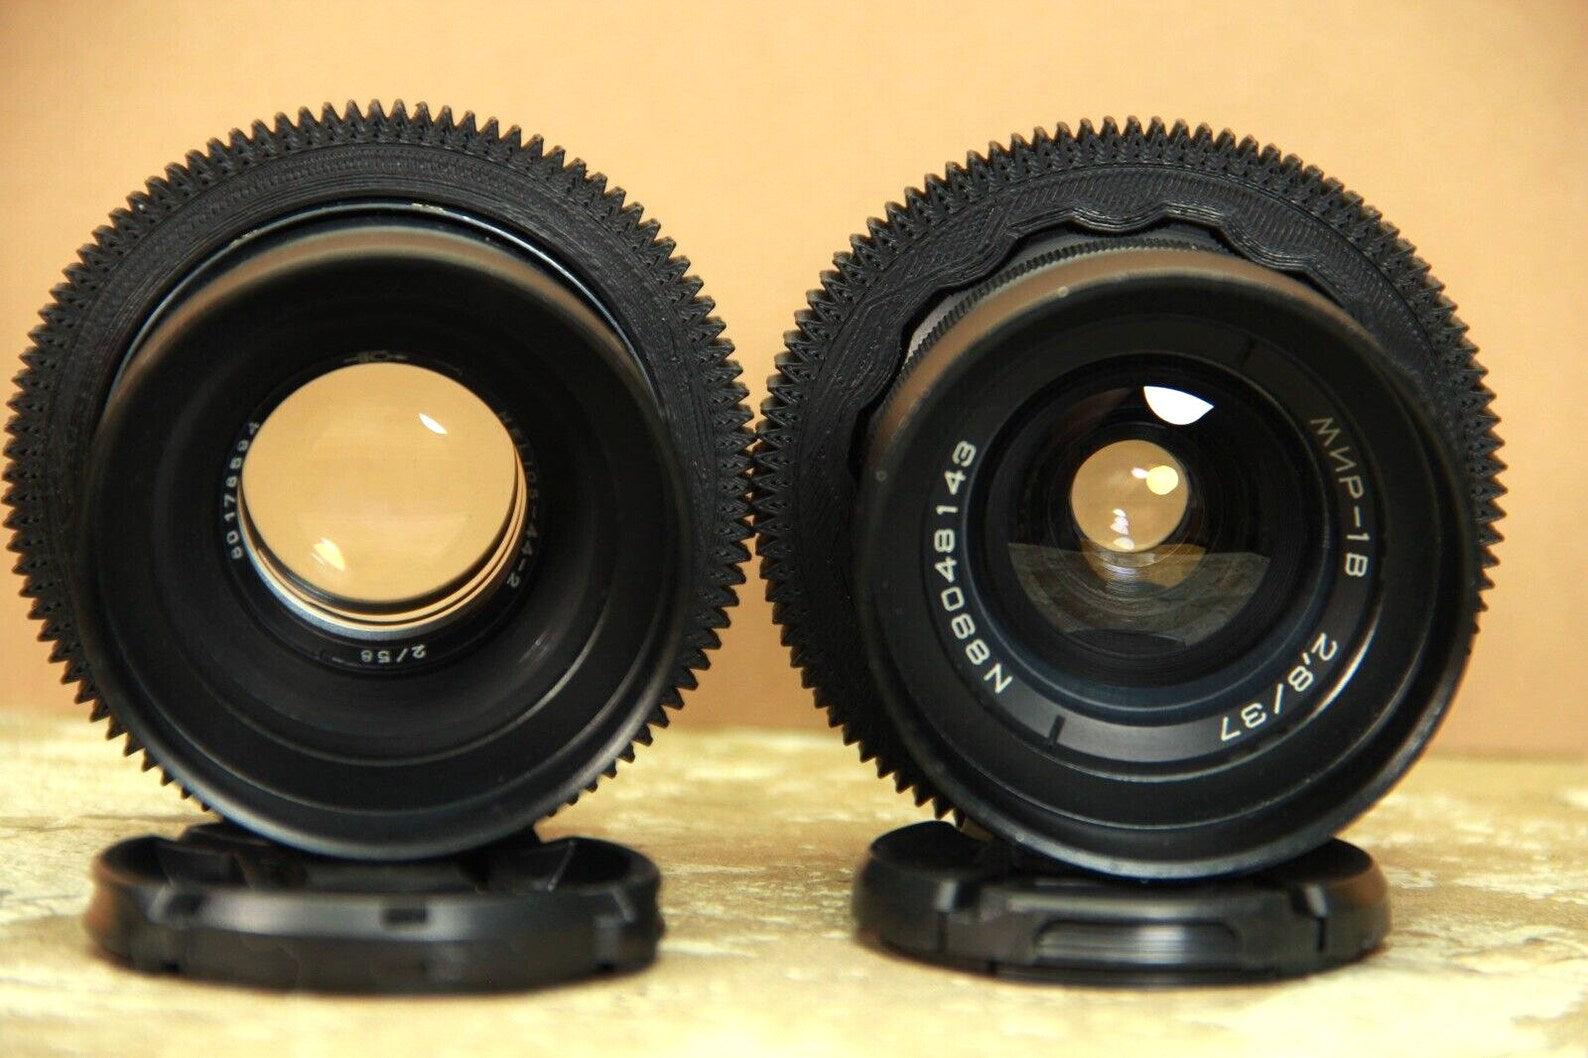 Two Soviet Lenses: Helios 44-2 58mm F/2 and Mir-1B F2.8/37mm DSLR with PL Adapter